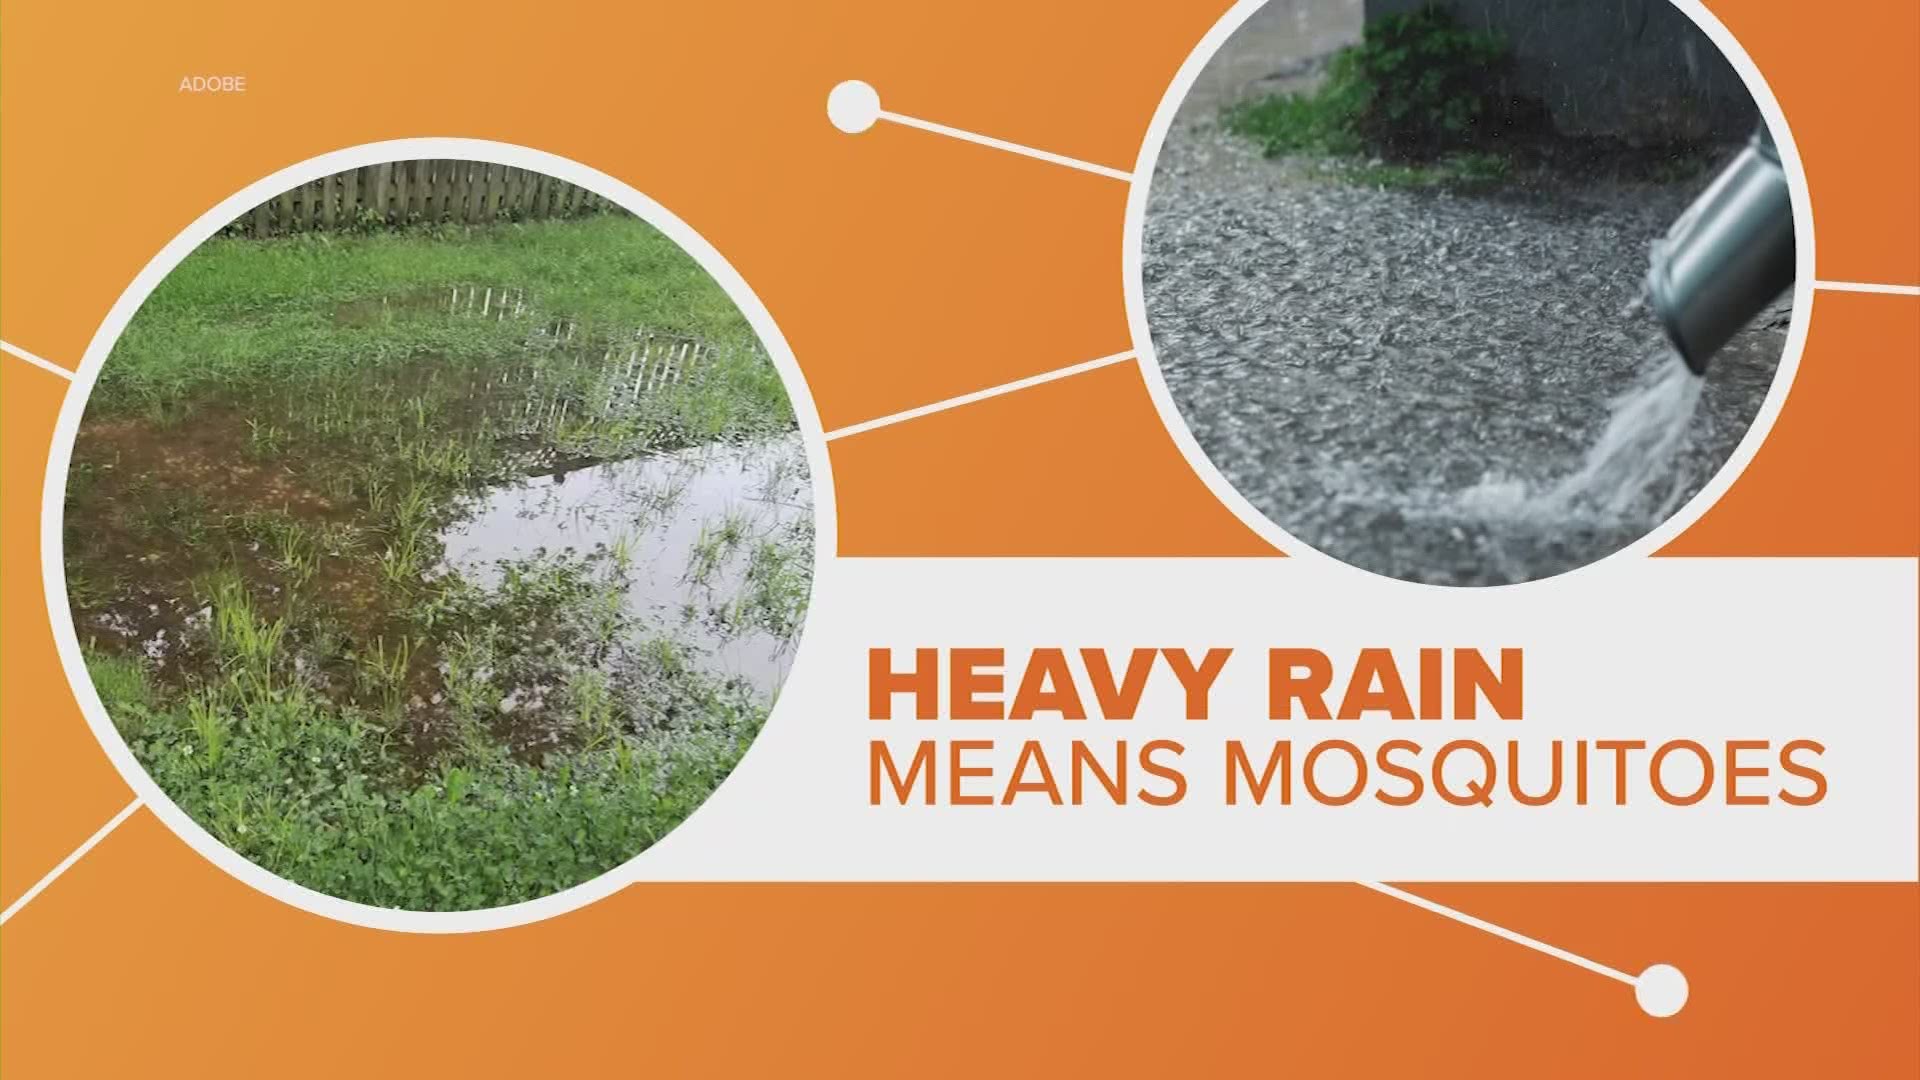 After heavy rains, we know what comes next -- mosquitoes. But what can we expect and how can we stop them? Let’s connect the dots.